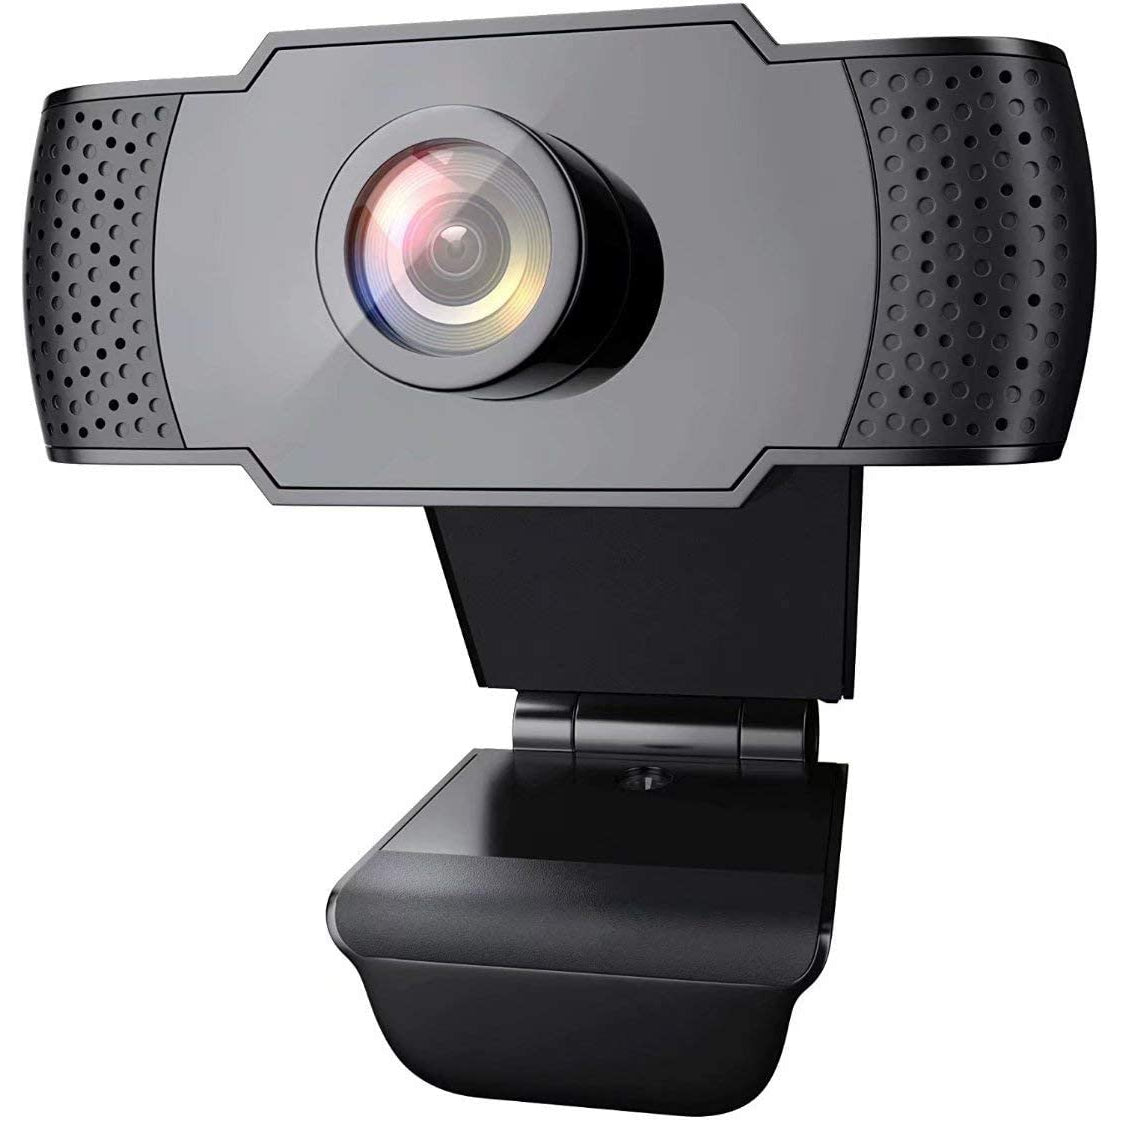 Wansview 1080P Webcam with Microphone, USB 2.0 Desktop Laptop Computer Web Camera with Auto Light Correction